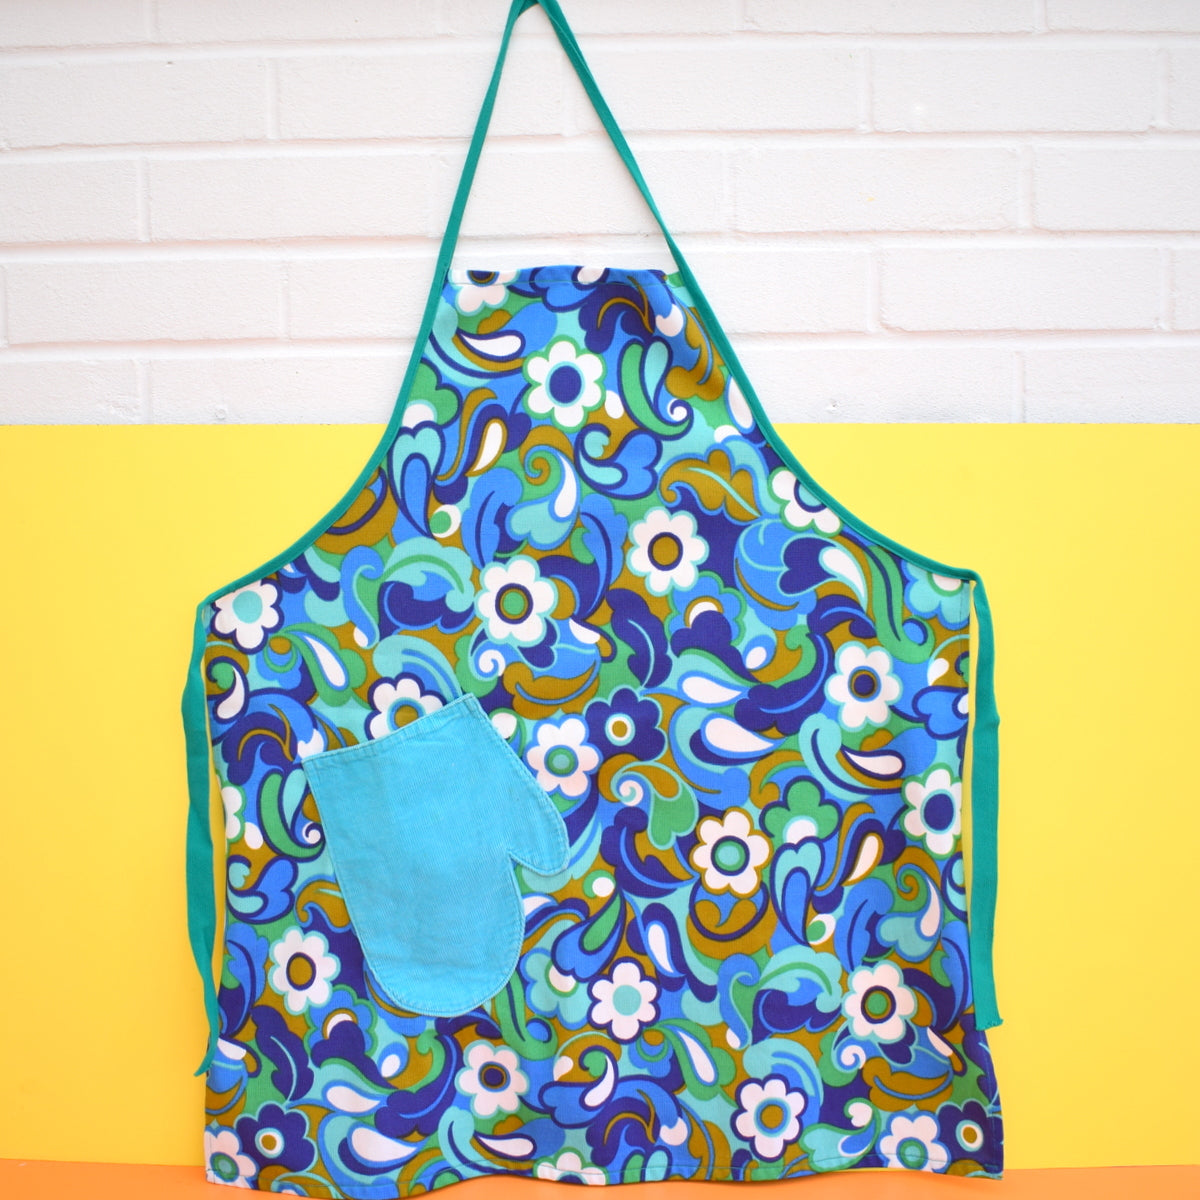 Vintage 1960s Psychedelic / Flower Power Full Apron - Blue & Green